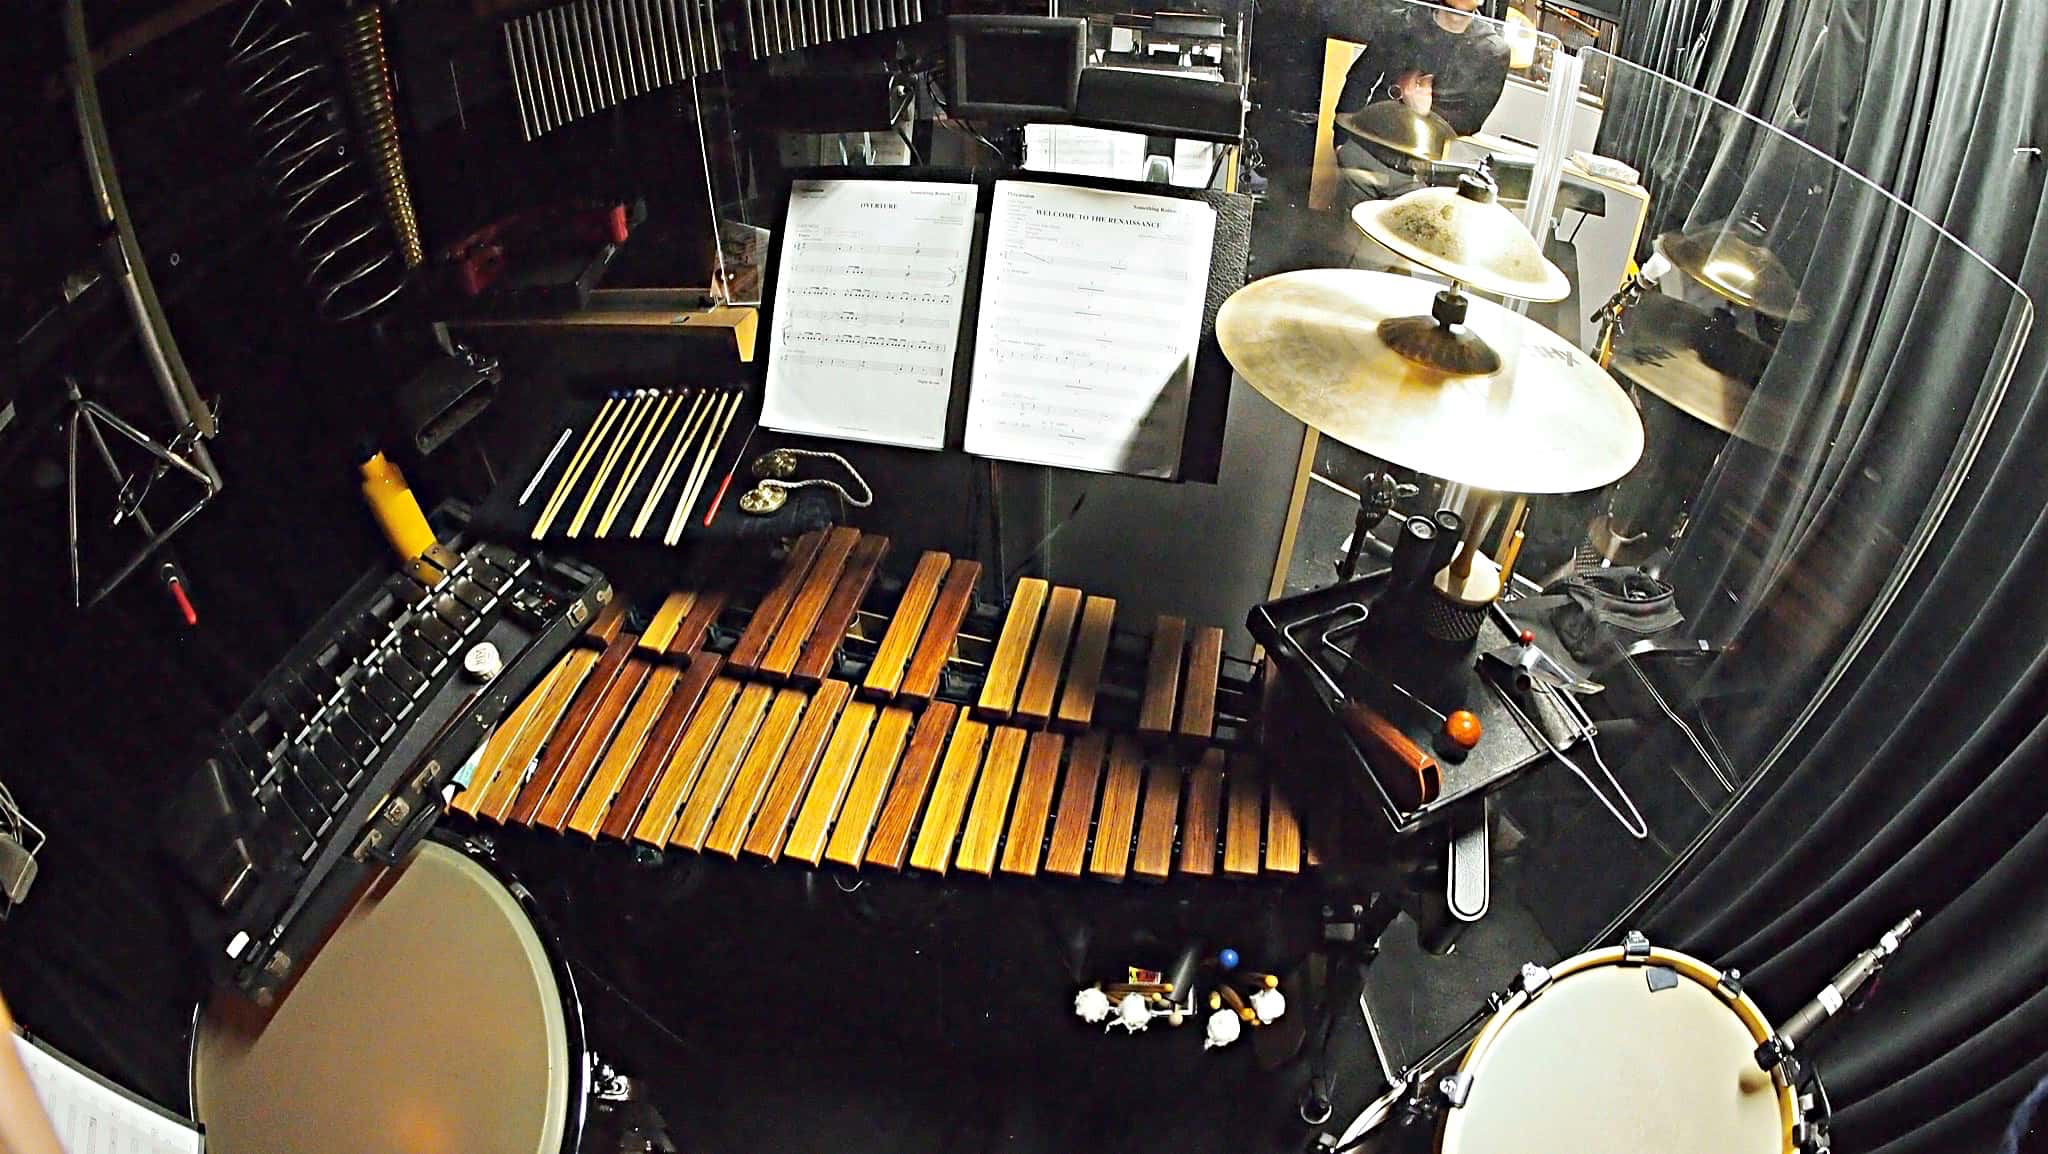 Sean Ritenauer's percussion setup for the Broadway production of Something Rotten at the St James Theatre.